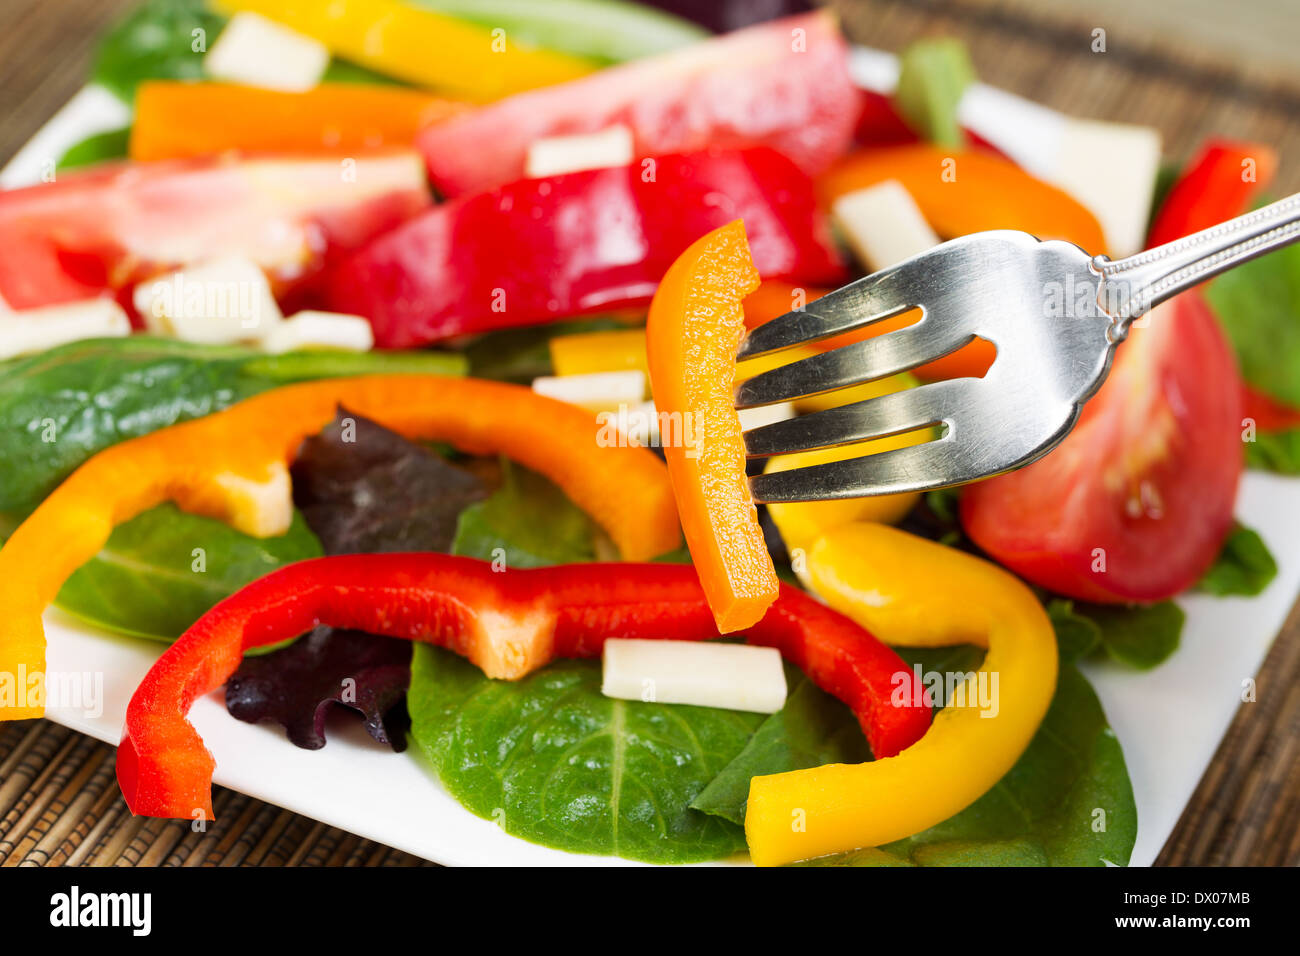 Horizontal photo of a fork holding a single piece of yellow bell pepper with salad and plate in background Stock Photo